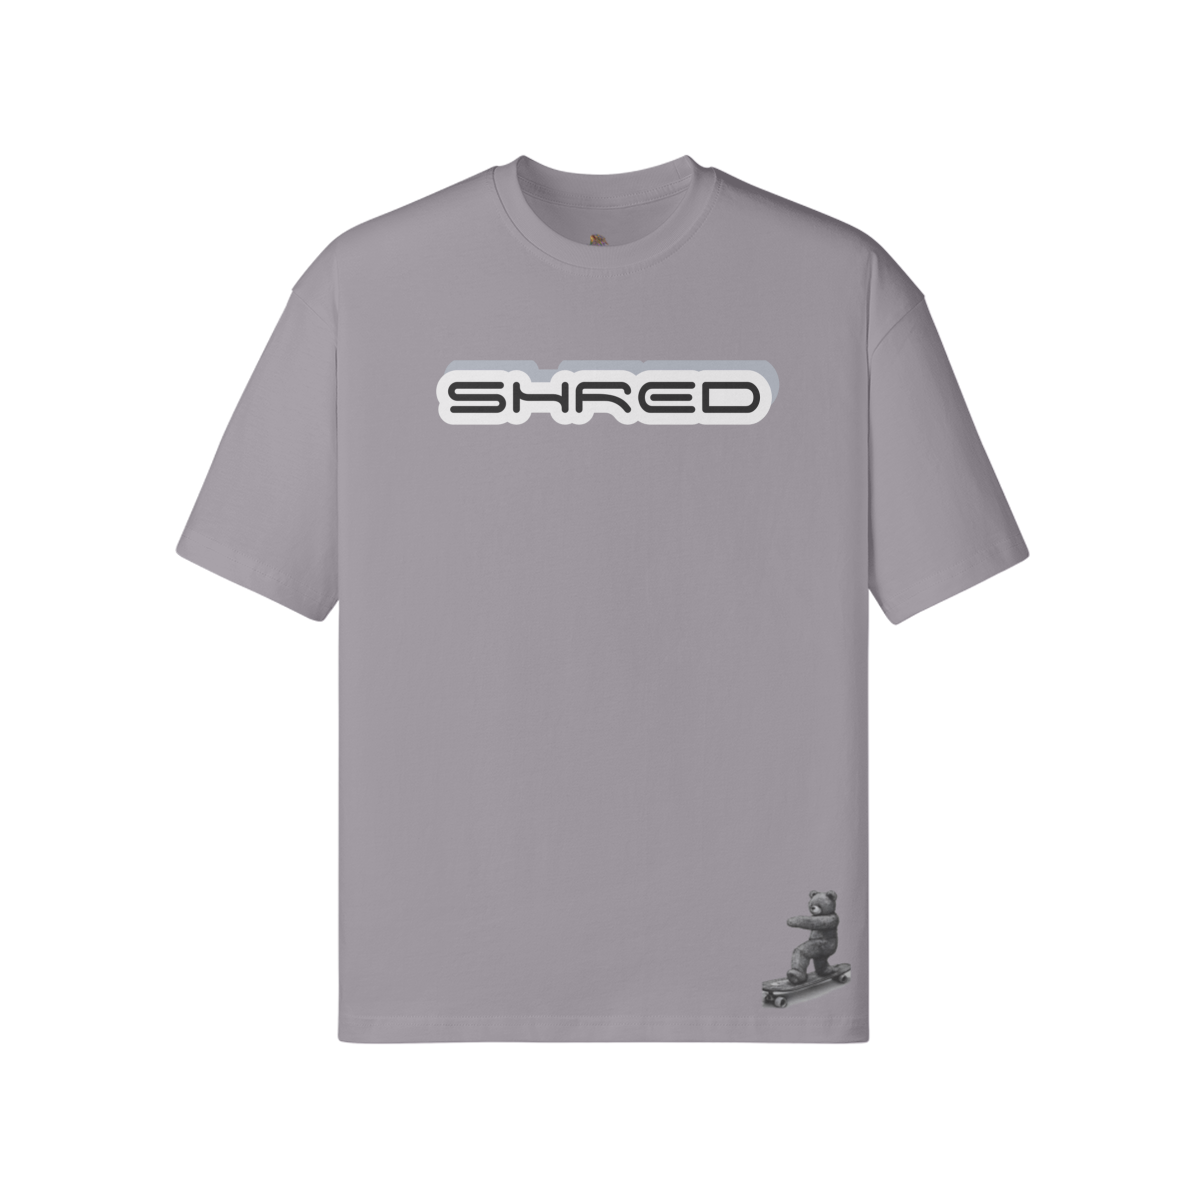 LIGHT GRAY - Teddy Ride Shred 190GSM Unisex Loose T-shirt - Unisex T-Shirt at TFC&H Co.